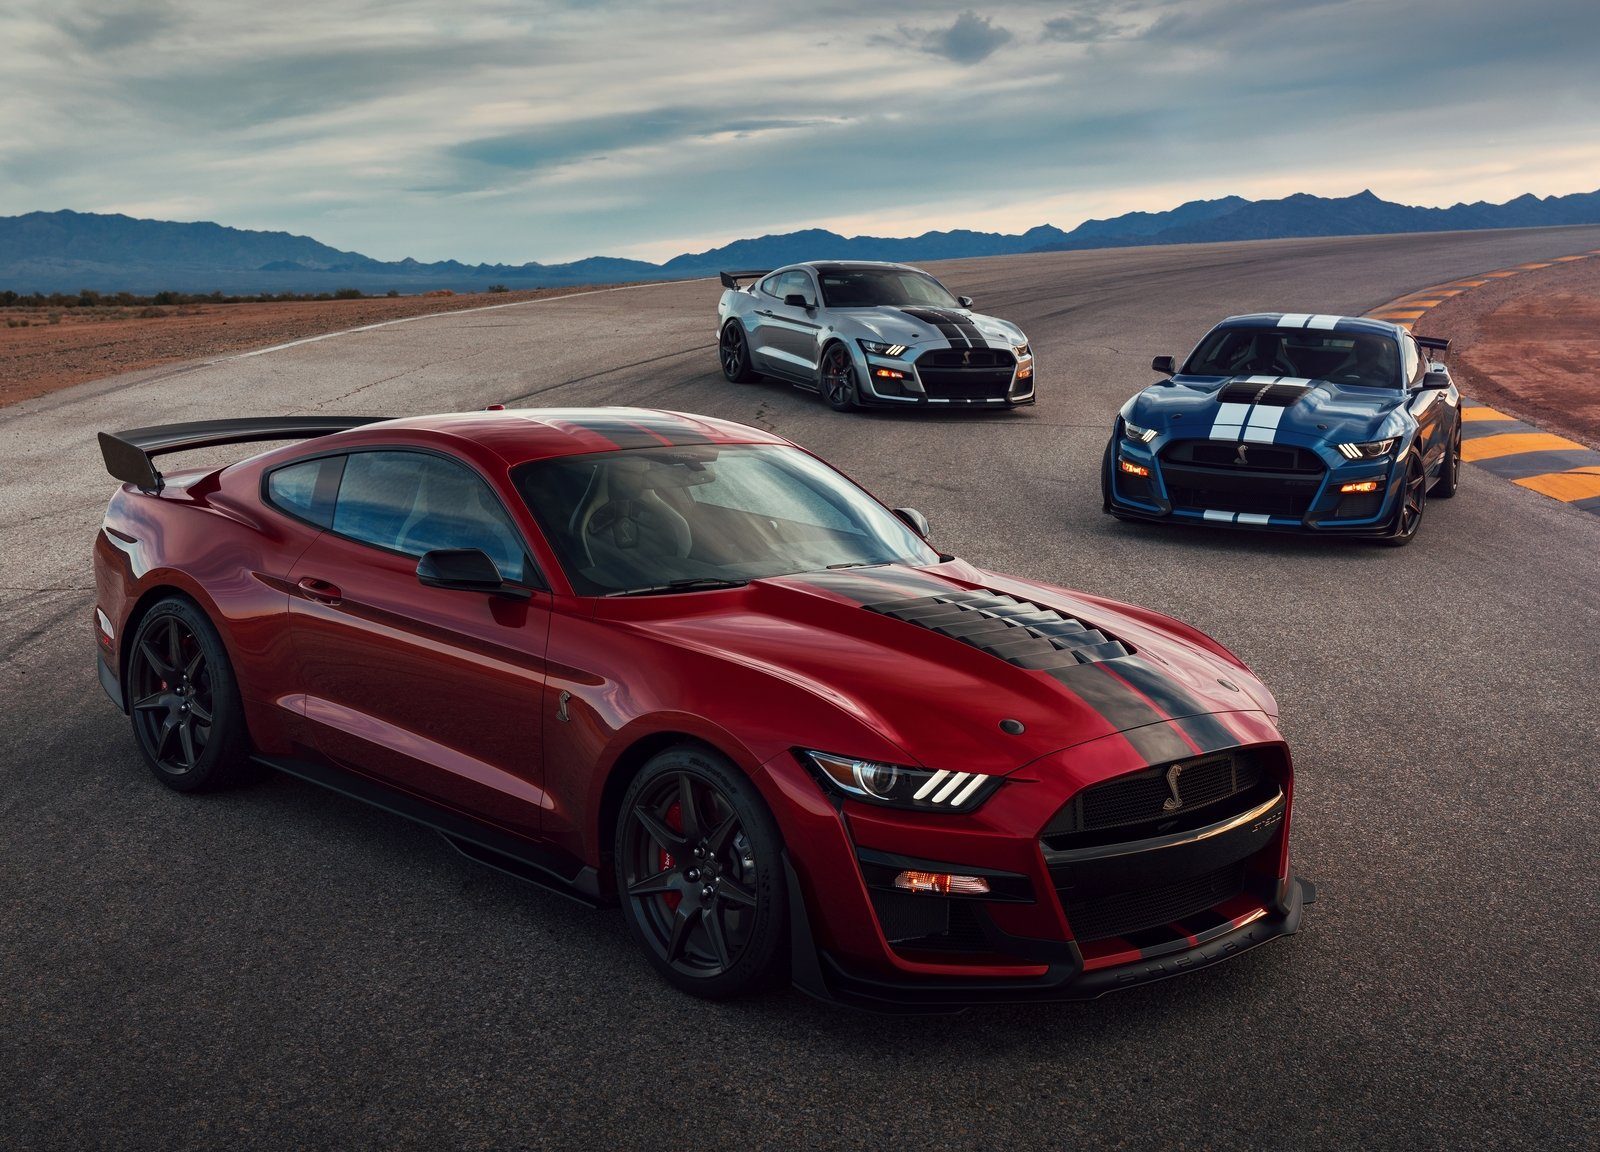 Three 2020 Shelby GT500 Ford Mustangs on race track